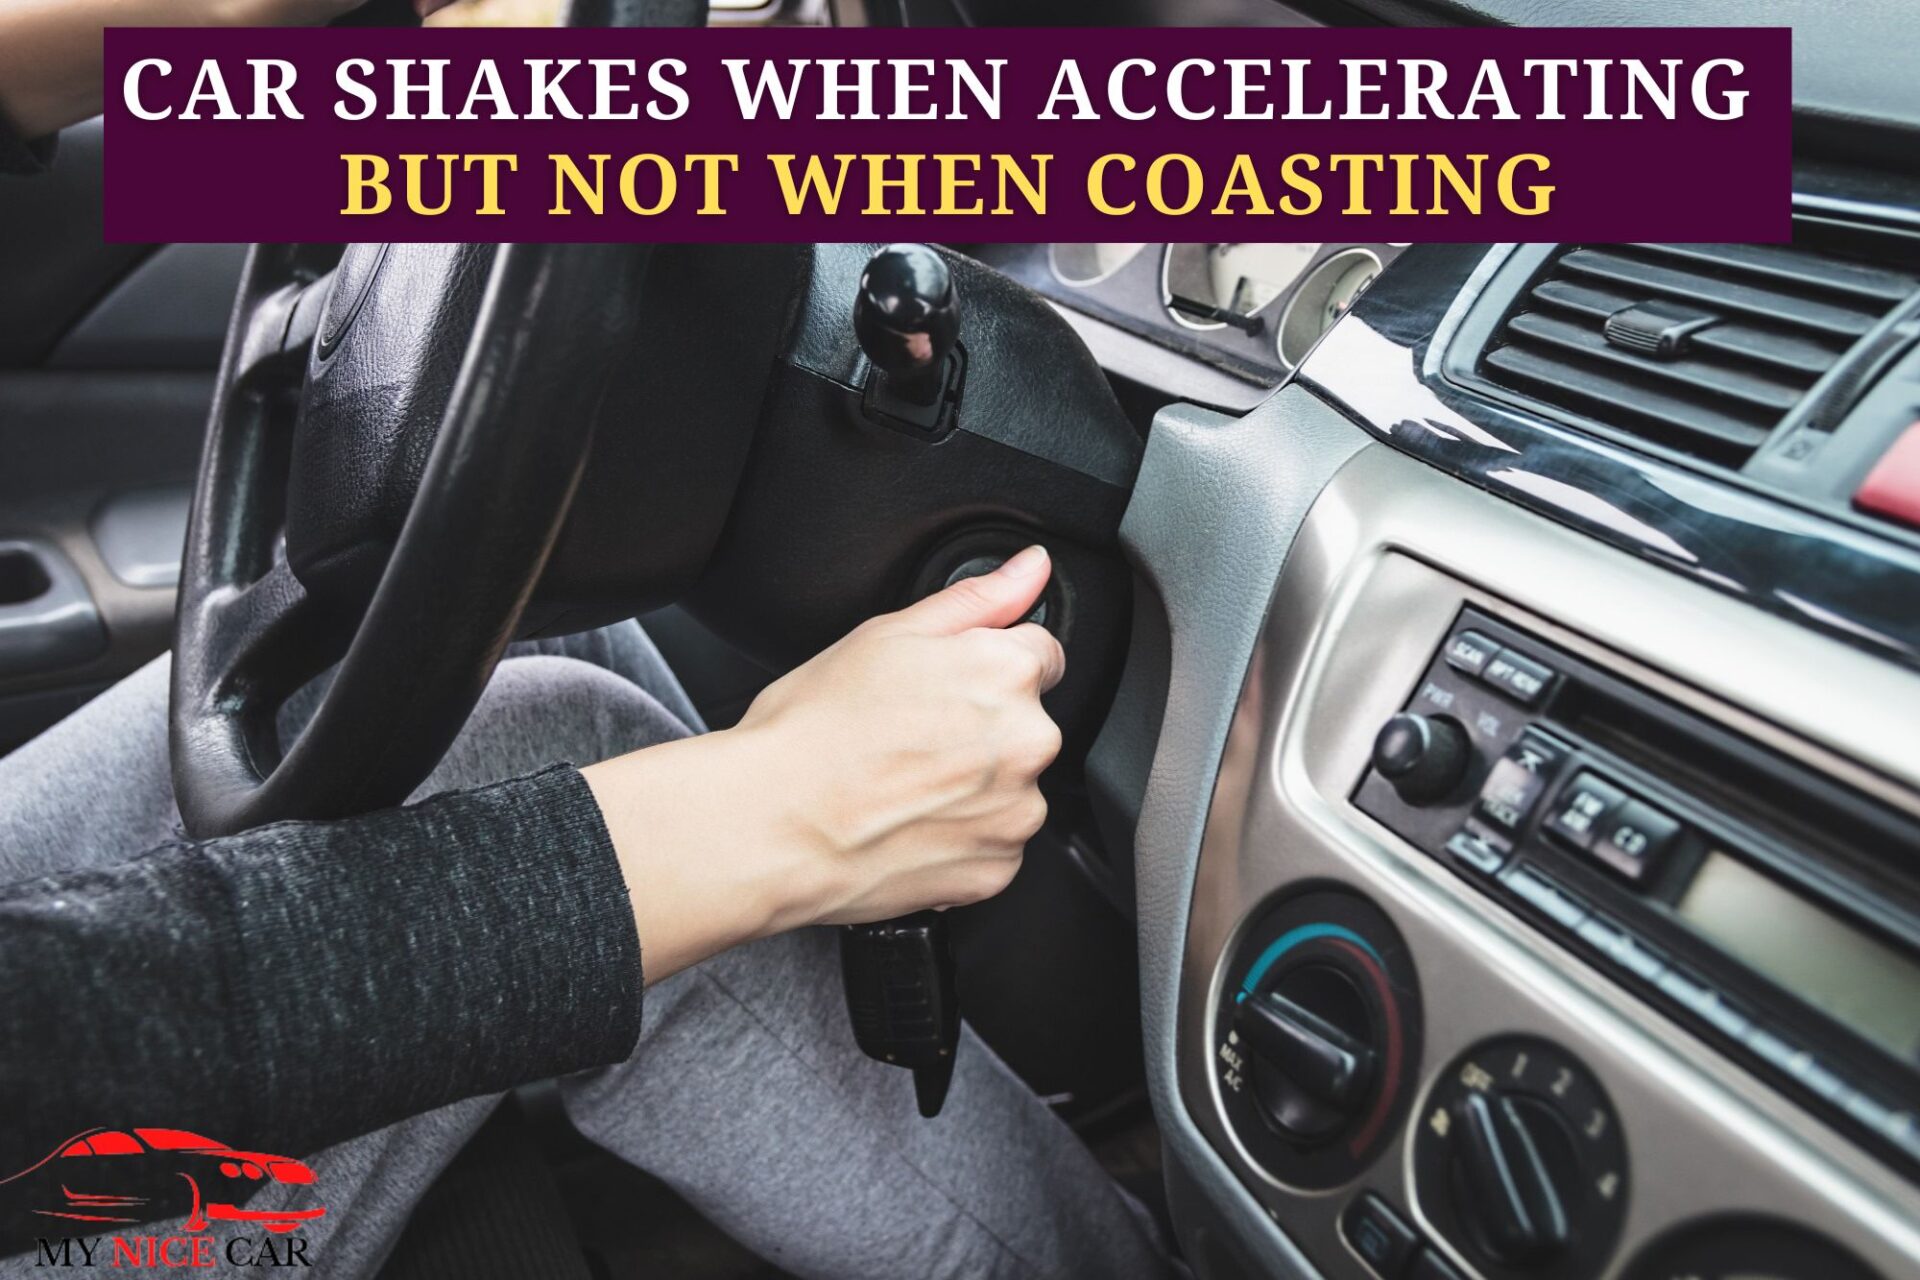 You are currently viewing The Top Causes And Solutions of Car Shakes When Accelerating but not when coasting